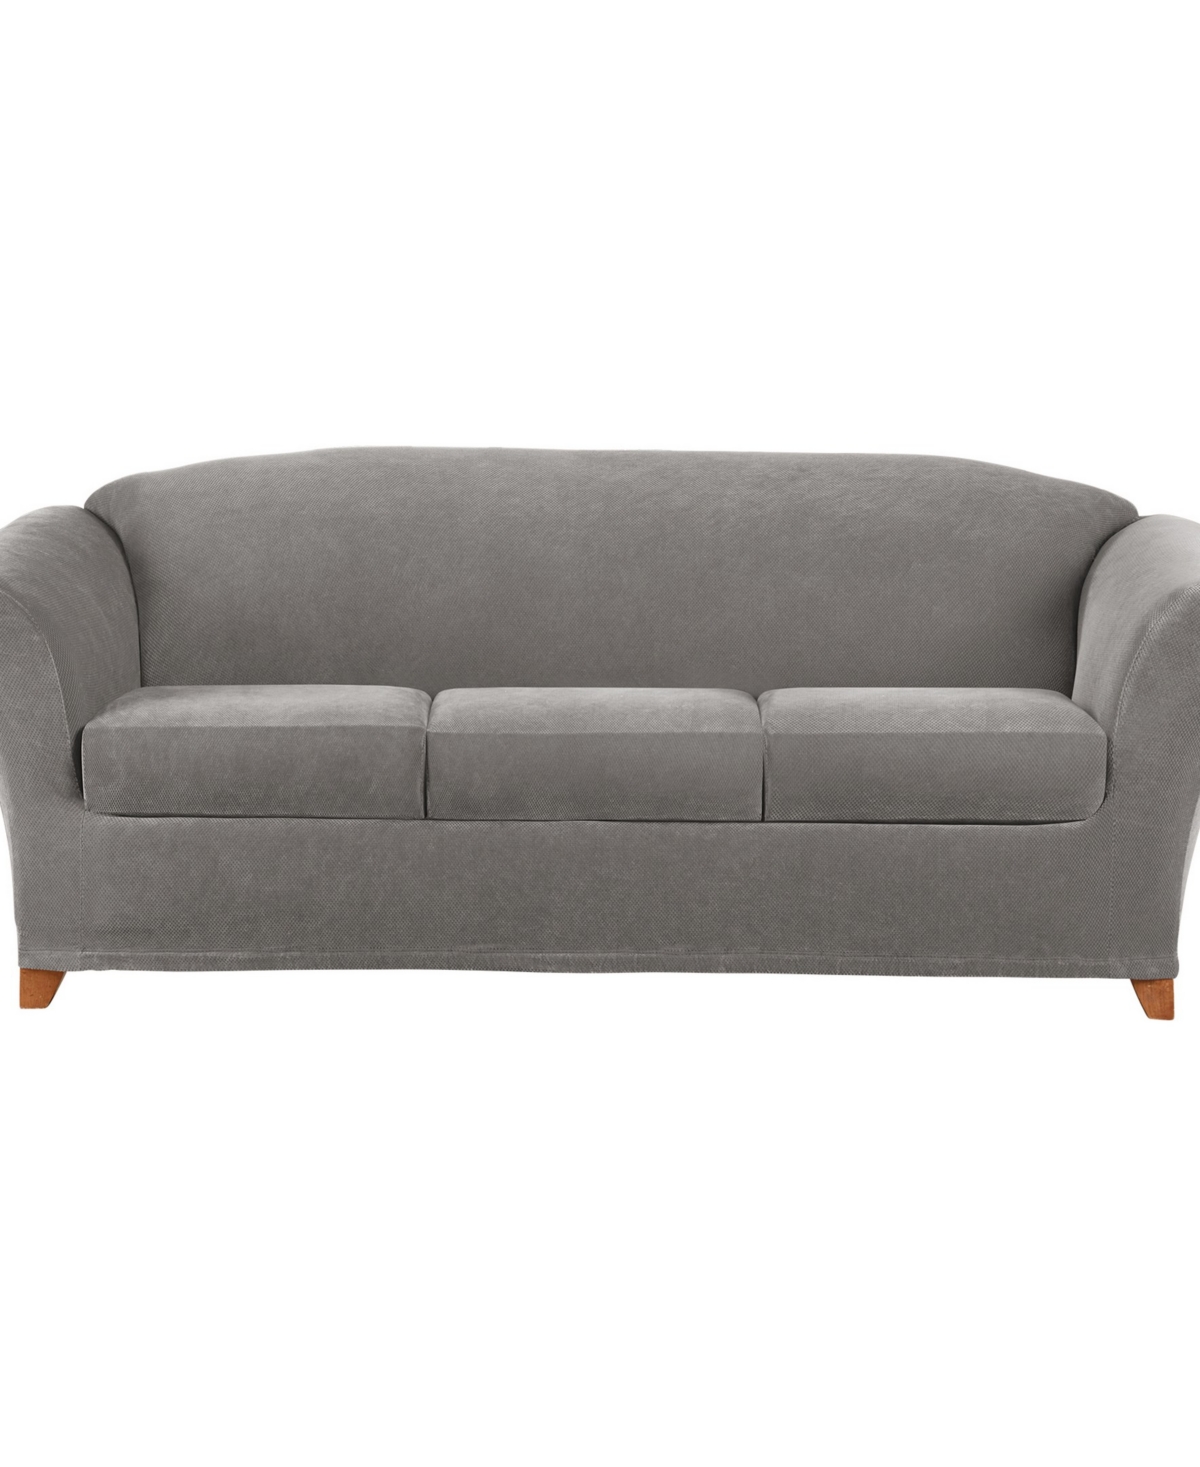 Sure Fit Stretch Pique 4-pc Sofa Slipcover Set, 96" X 40" In Flannel Gray